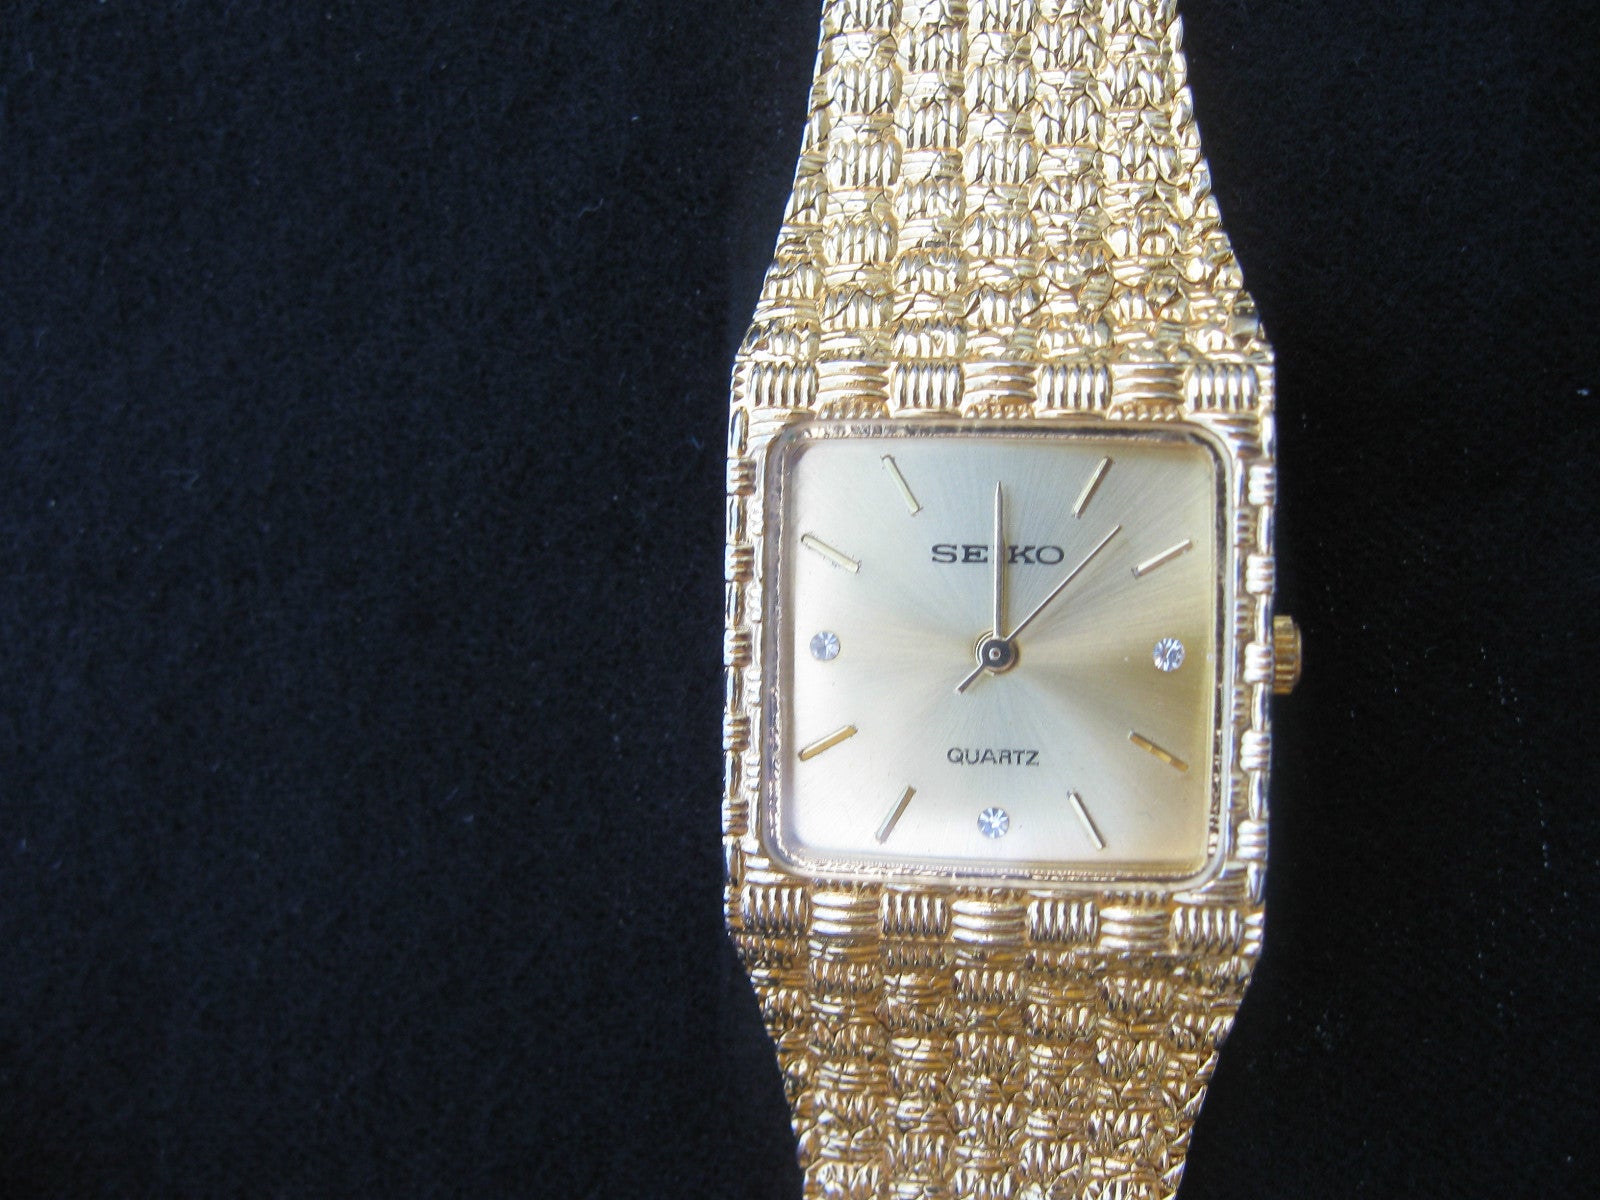 Is this a solid 14k gold Seiko watch? | The Watch Site